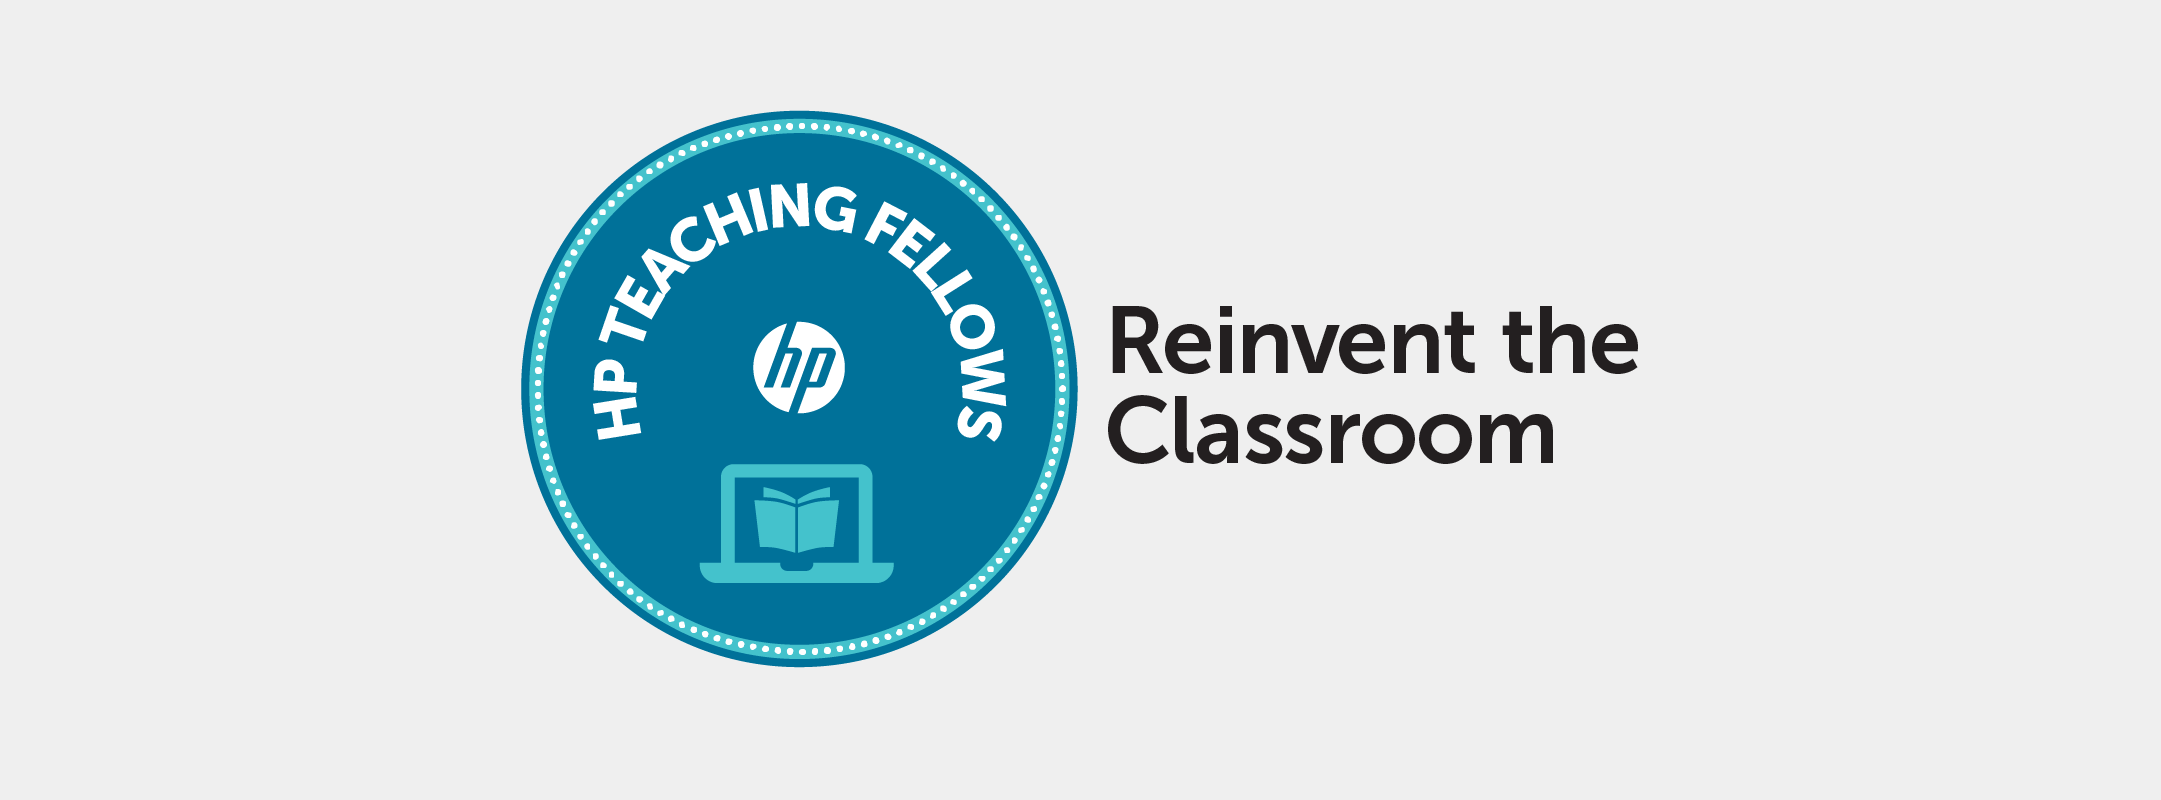 Reinvent The Classroom